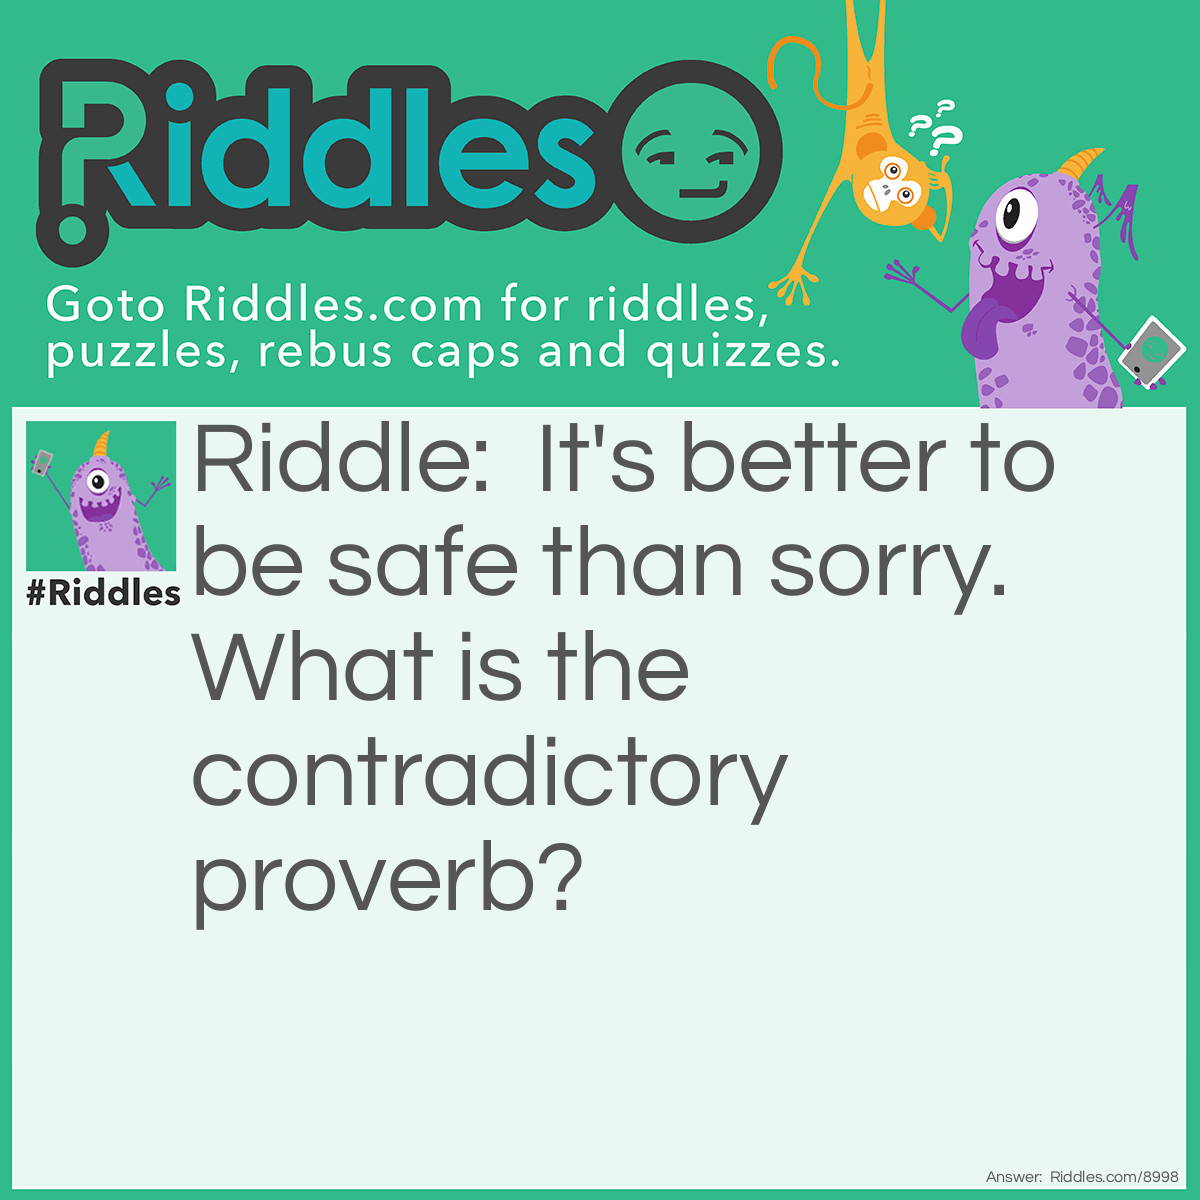 Riddle: It's better to be safe than sorry. What is the contradictory proverb? Answer: Nothing ventured, nothing gained.